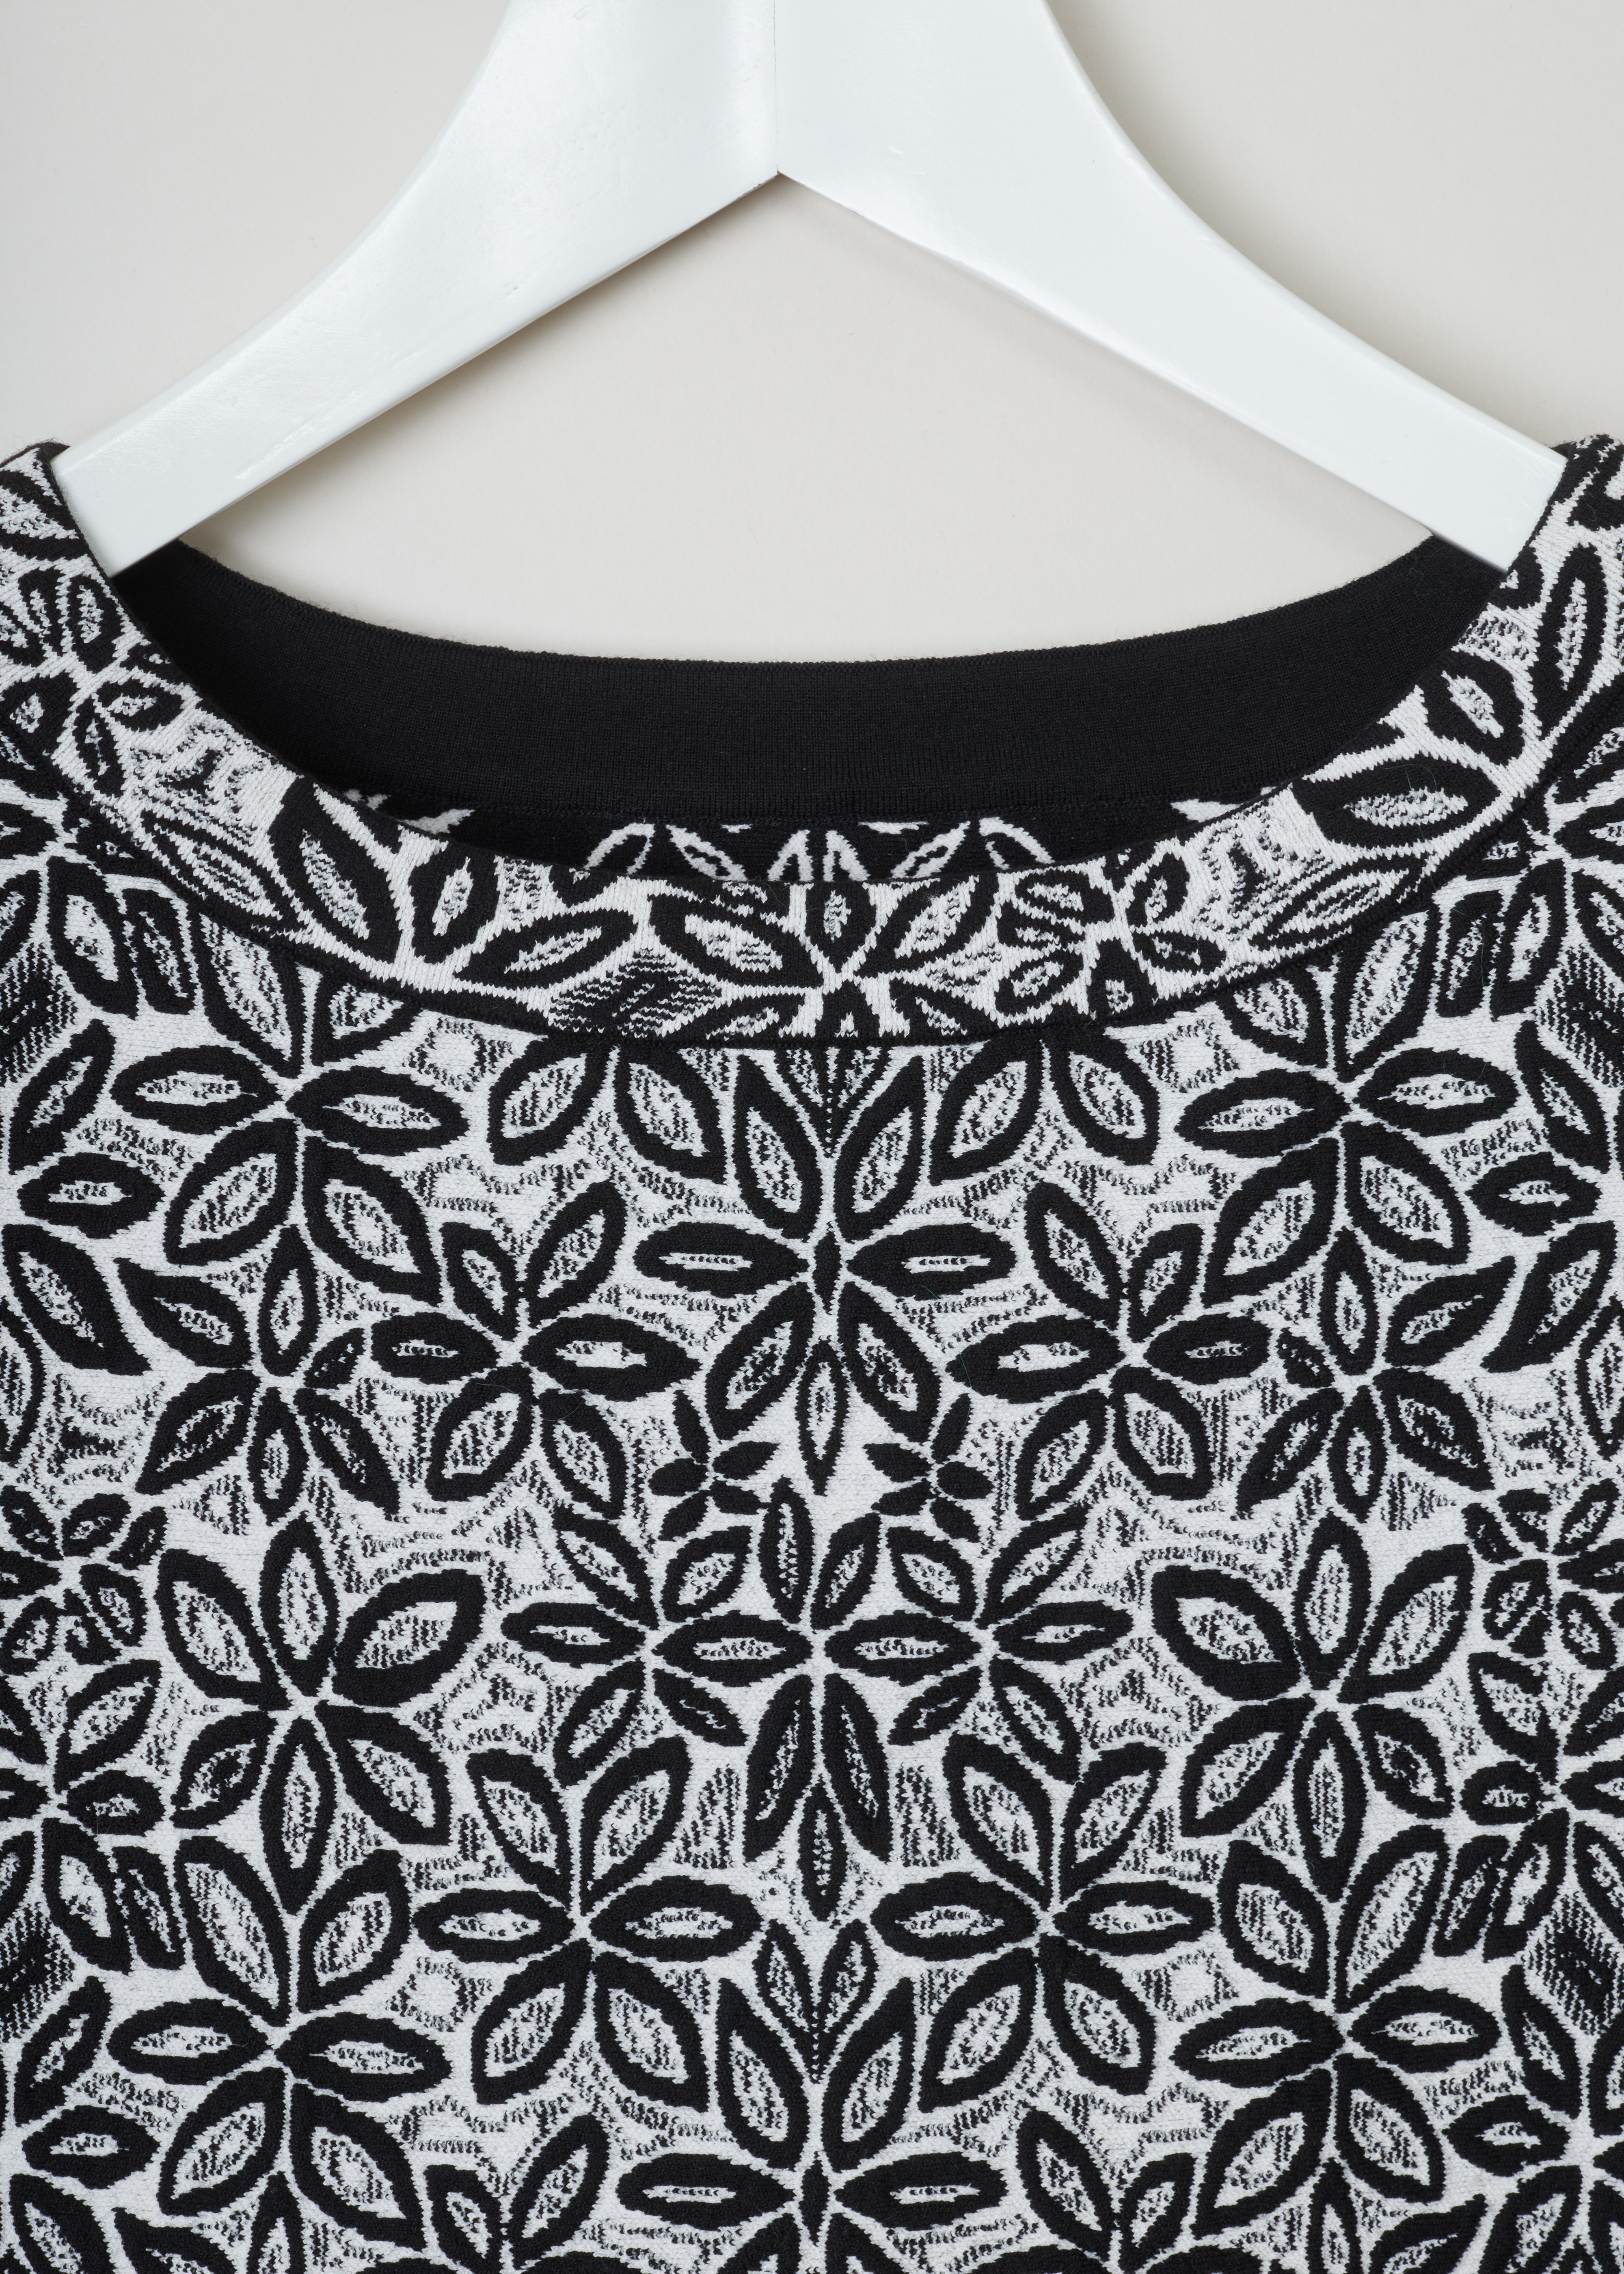 AlaÃ¯a, Wool-blend tunic with a flower pattern, 7W9UE52RM353_TUNIQUE_ADENIUM_C009_Blanc/Noir, Grey, Print, Detail, Jacquard knitted tunic with a black and white flower motif. The dress has short sleeves, a wide round neckline, an A-line silhouette and scalloped hems.

